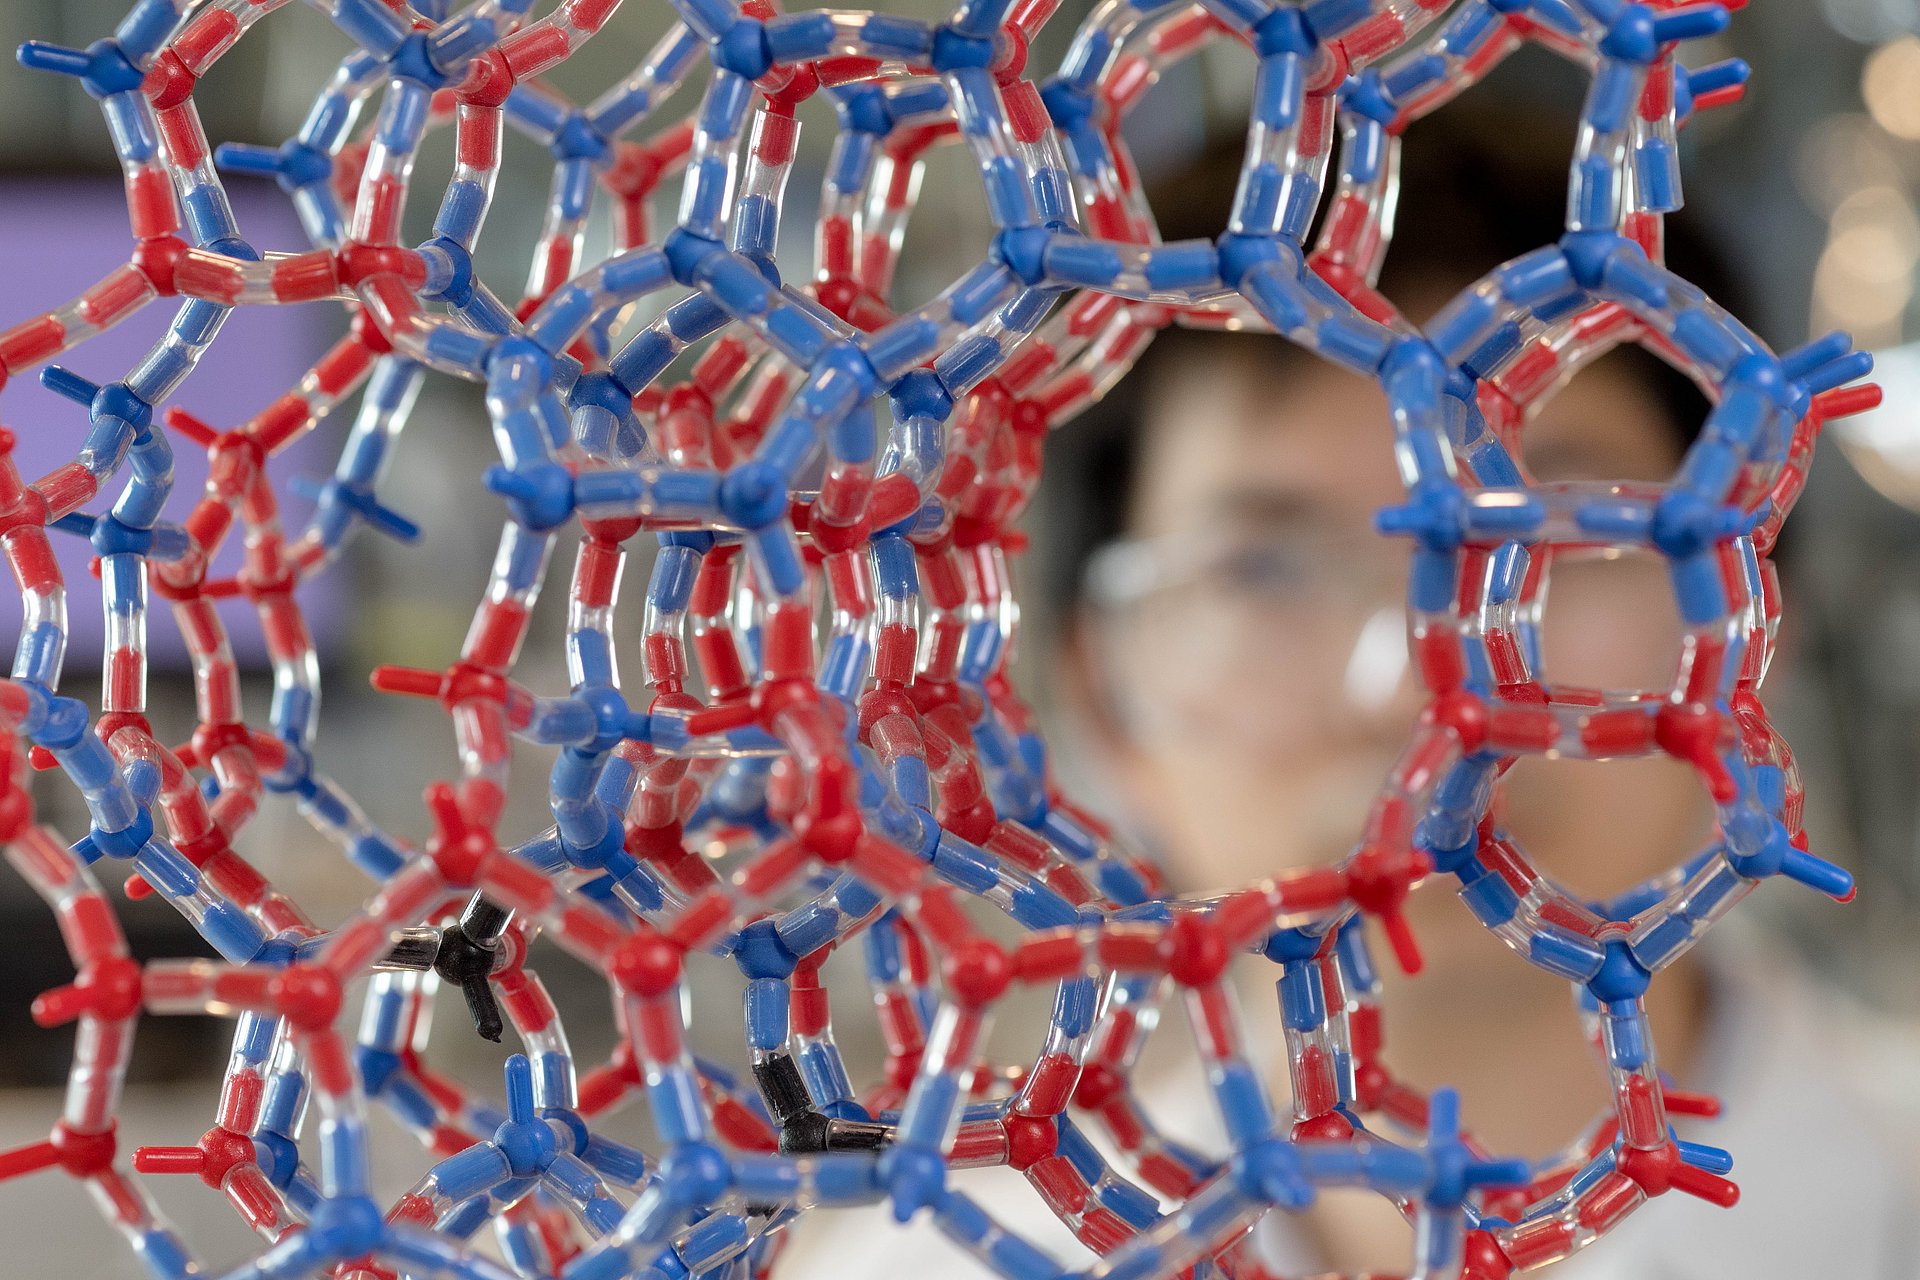 A molecule model at tums catalysis research center.